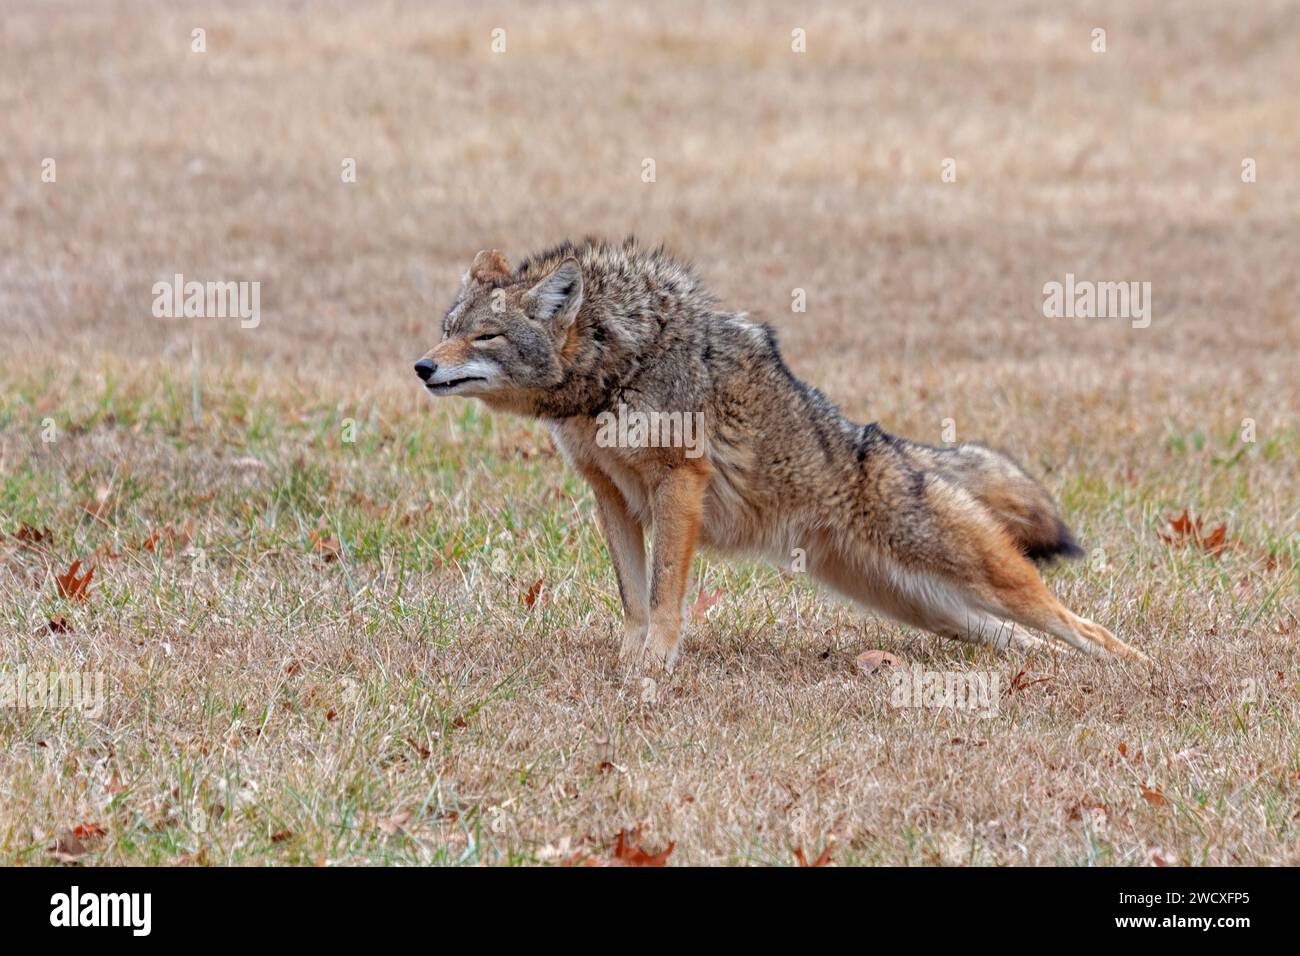 A coyote stretches in an open prairie. Its front paws are up, its  rear end down, as if in a plank pose yoga position. Stock Photo